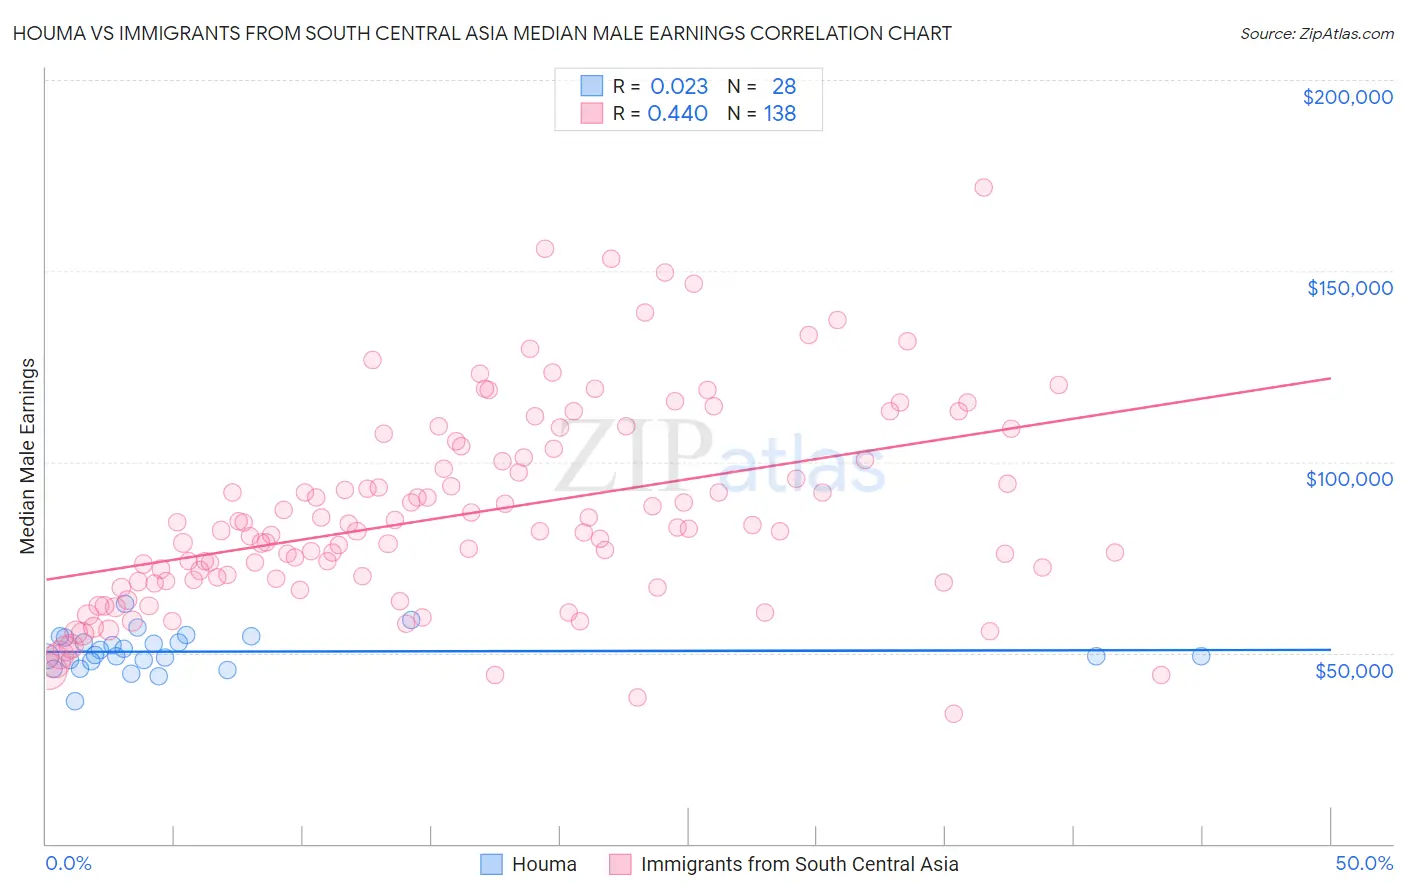 Houma vs Immigrants from South Central Asia Median Male Earnings